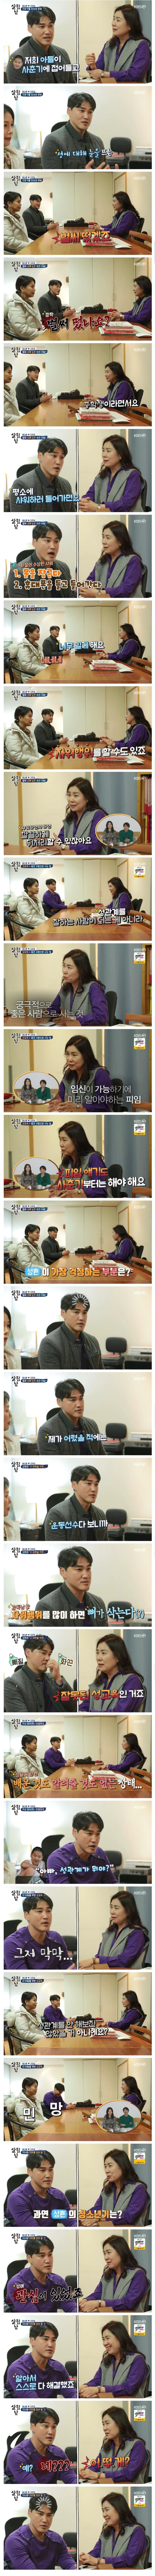 Hong Sung-heun visited an expert for sex education counseling for his adolescent son.